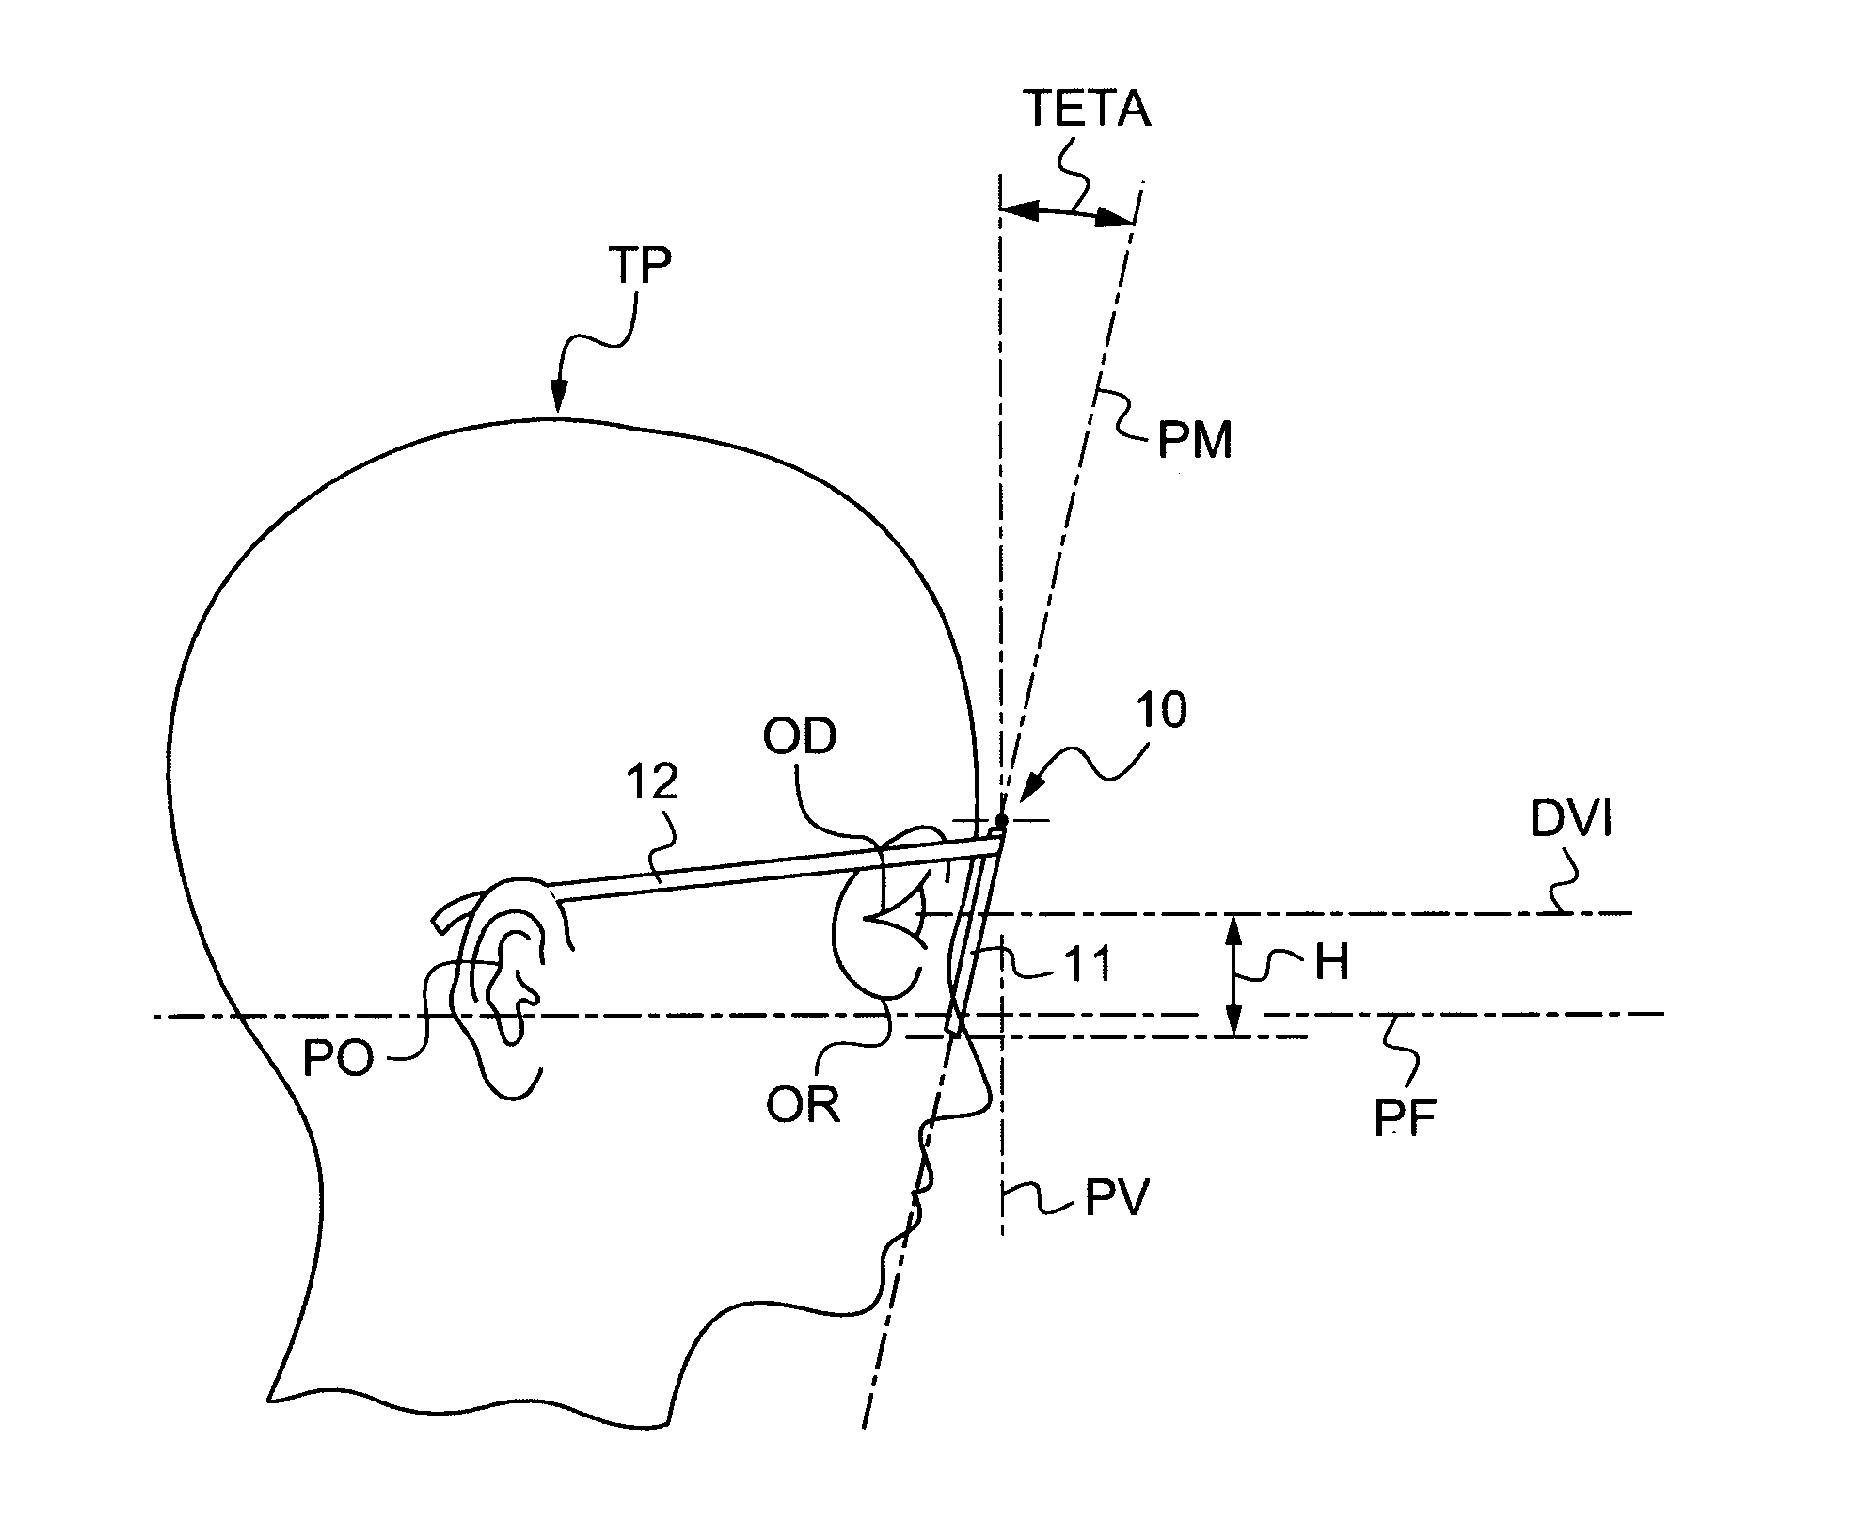 Method of measuring at least one geometrico-physionomic parameter for positioning a frame of vision-correcting eyeglasses on the face of a wearer